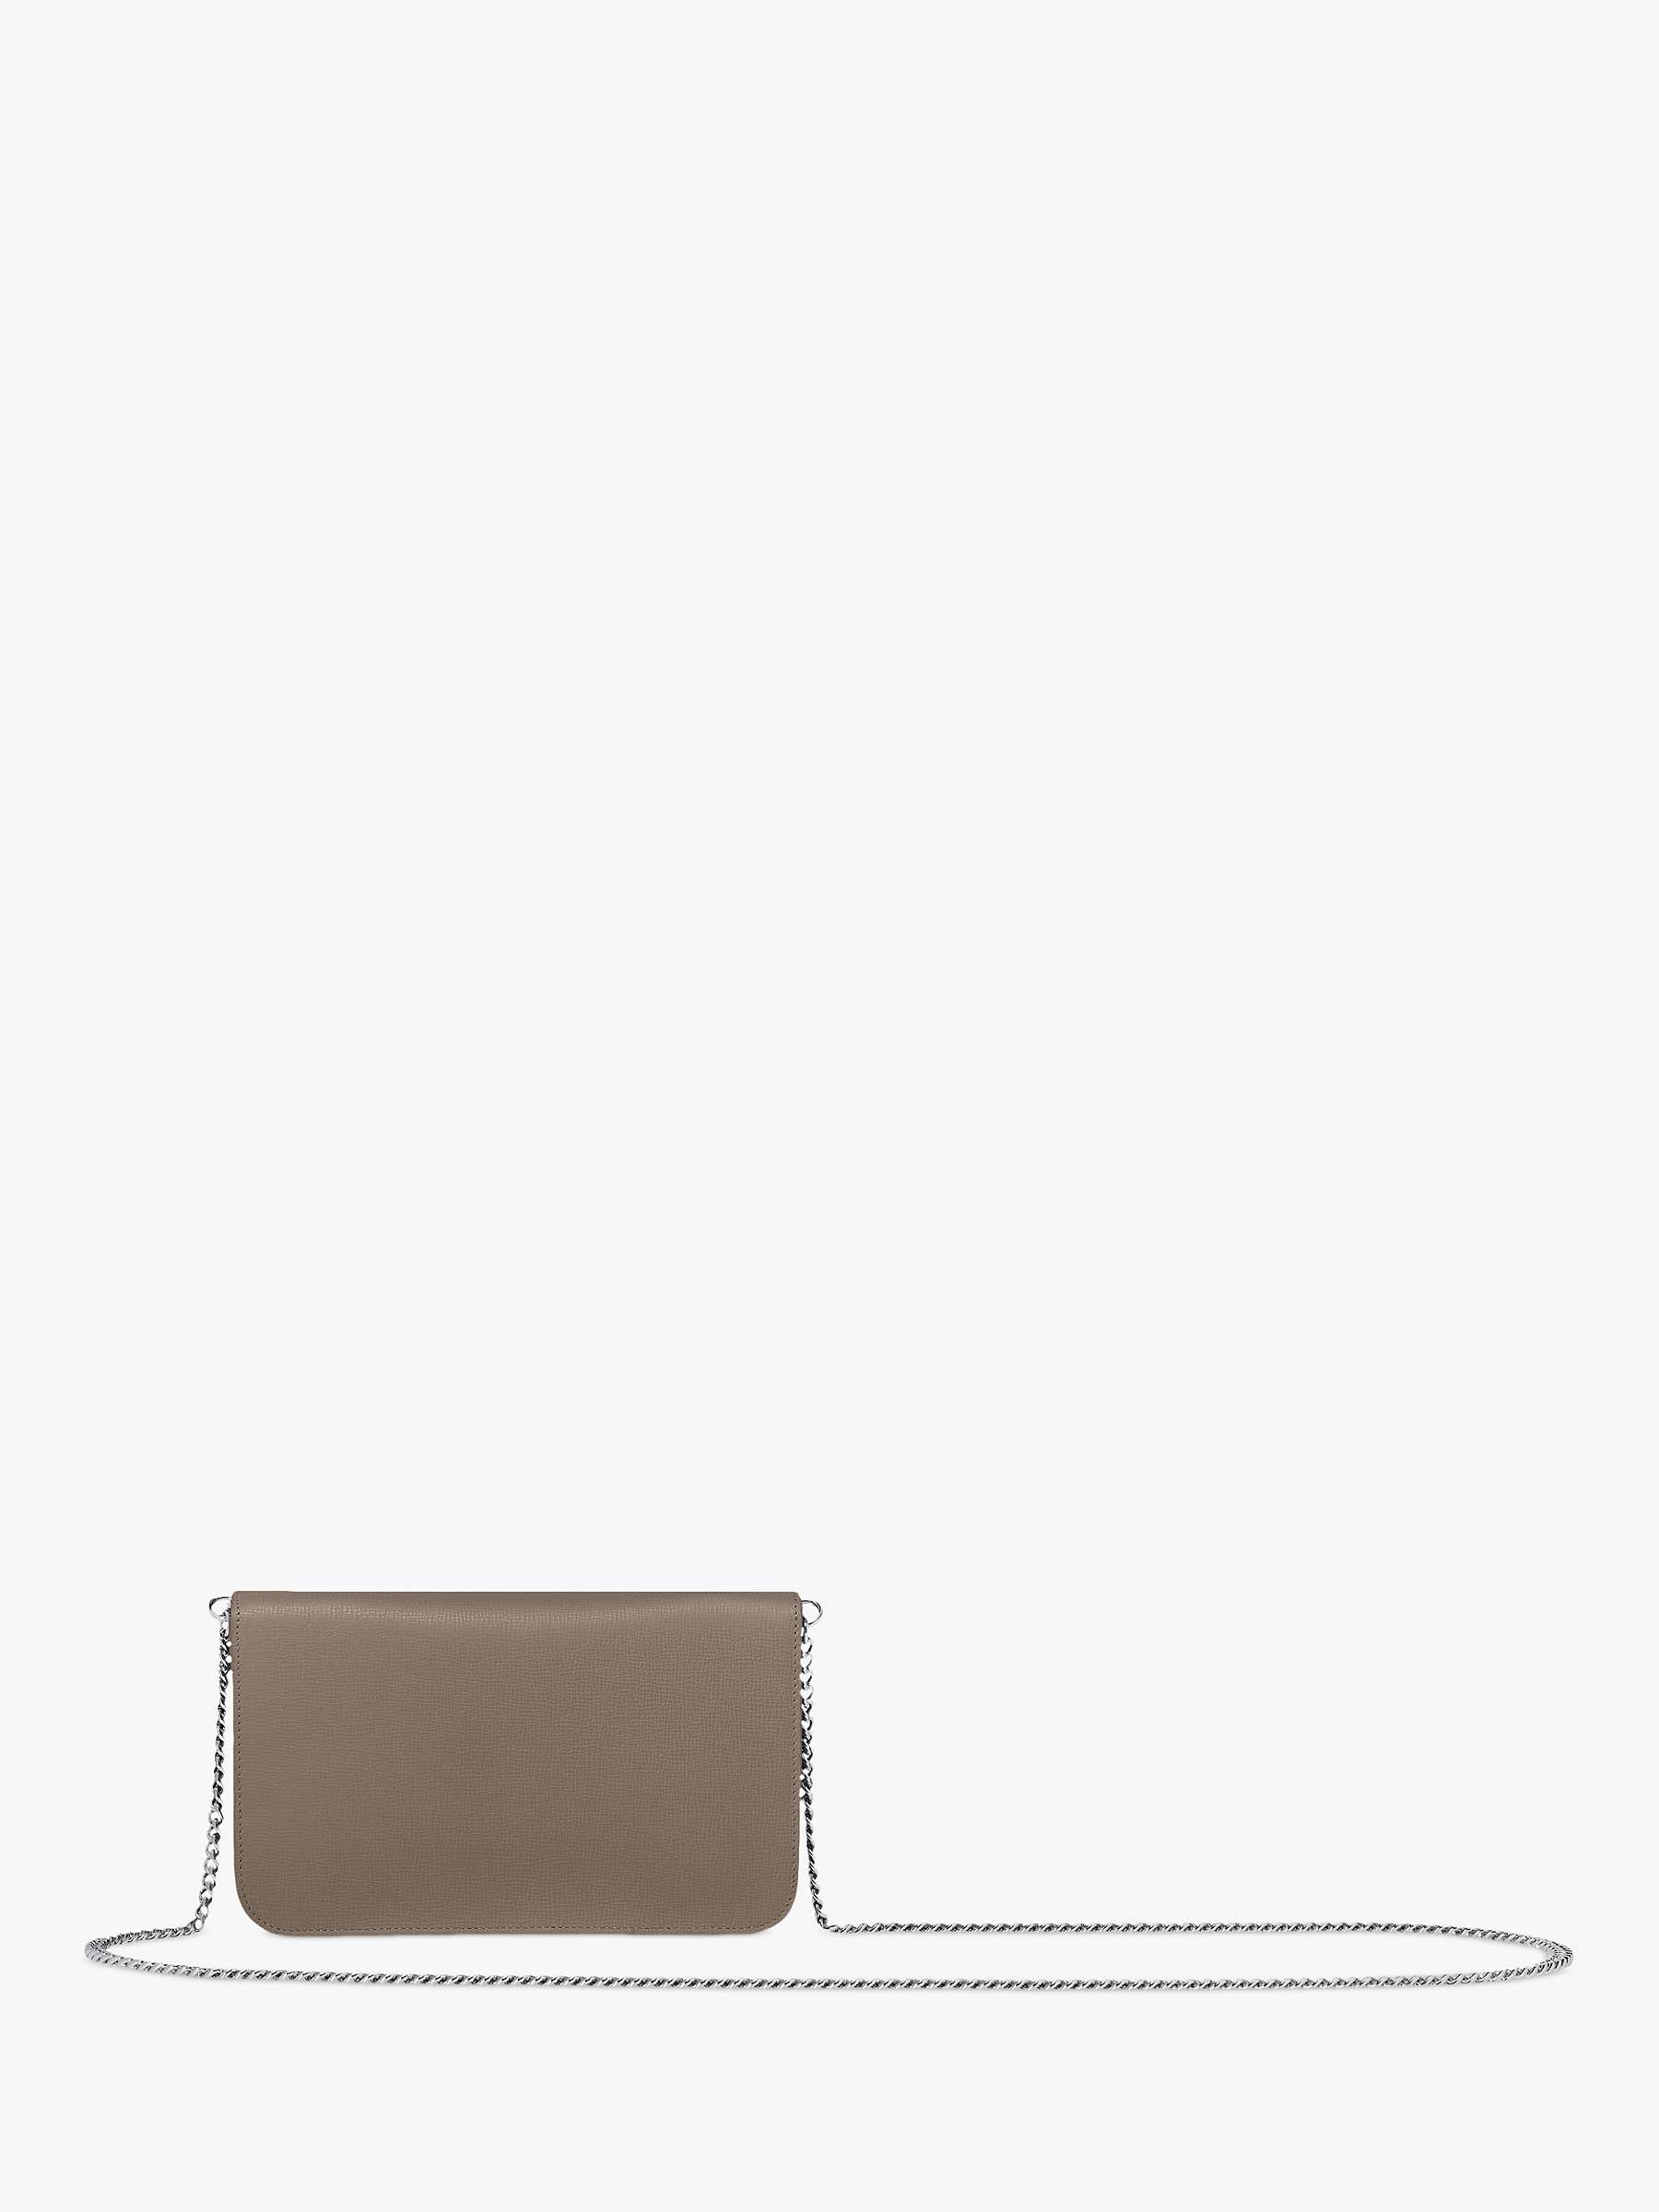 Buy Longchamp Le Pliage Néo Leather Wallet on Chain Online at johnlewis.com